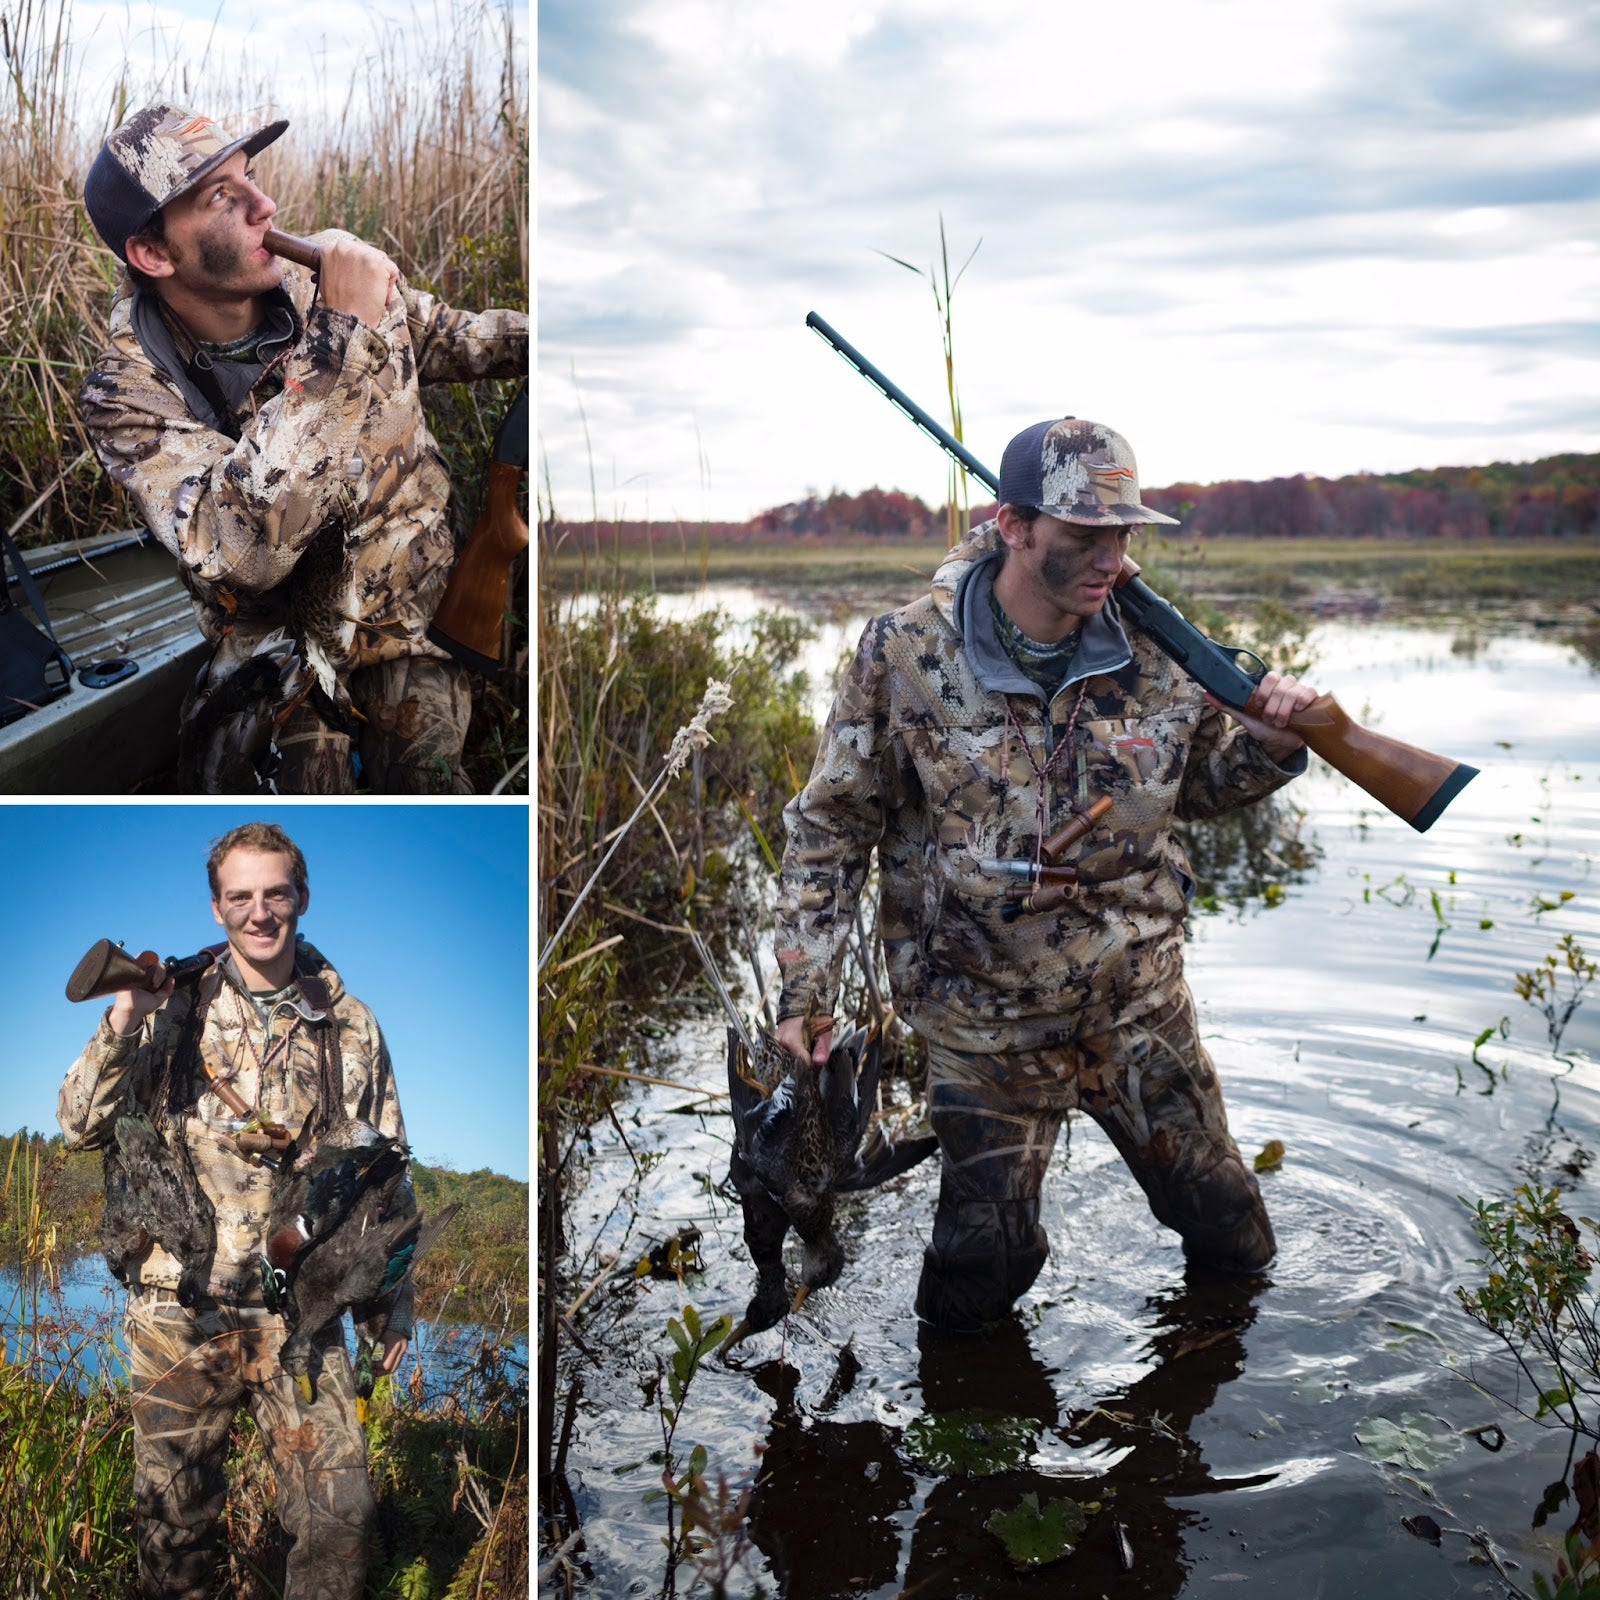 Waterfowl Hunters: Wear Your Life Jackets - Add A Life Jacket To